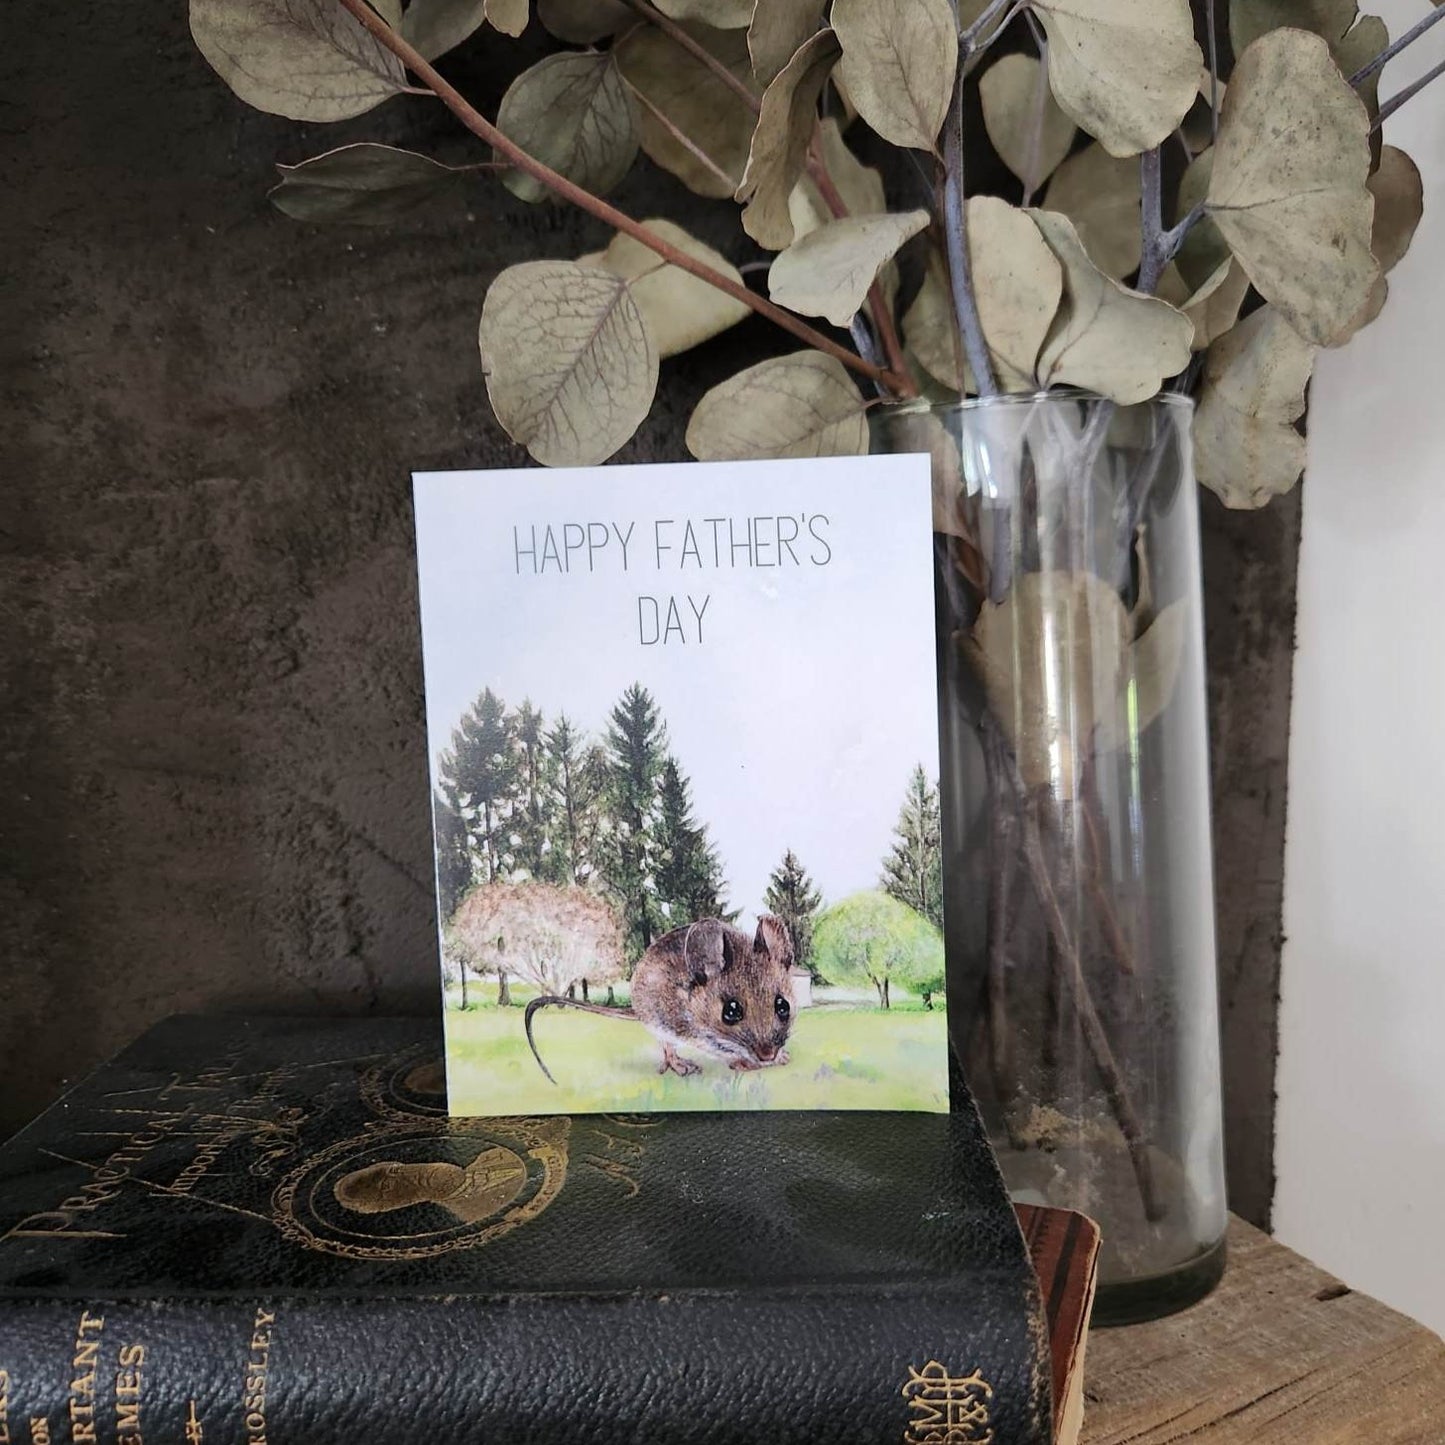 Happy Father's day card, Cute field mouse card, Nature greeting for dad, For husband, For Grandpa, Outdoorsy whimsical cottage card for him